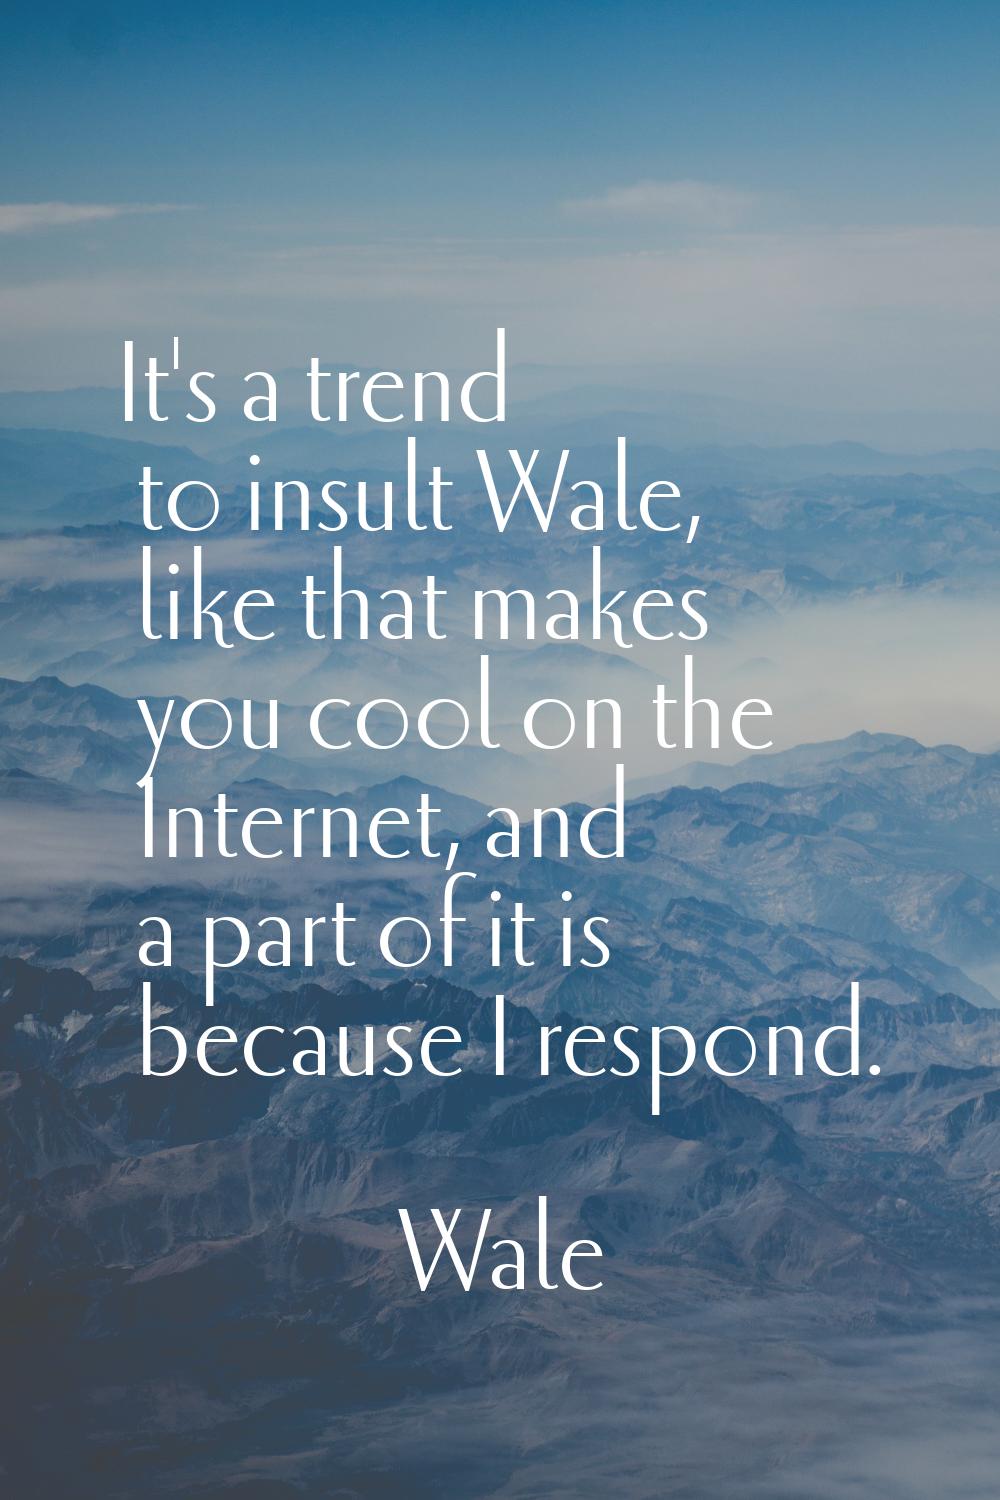 It's a trend to insult Wale, like that makes you cool on the Internet, and a part of it is because 